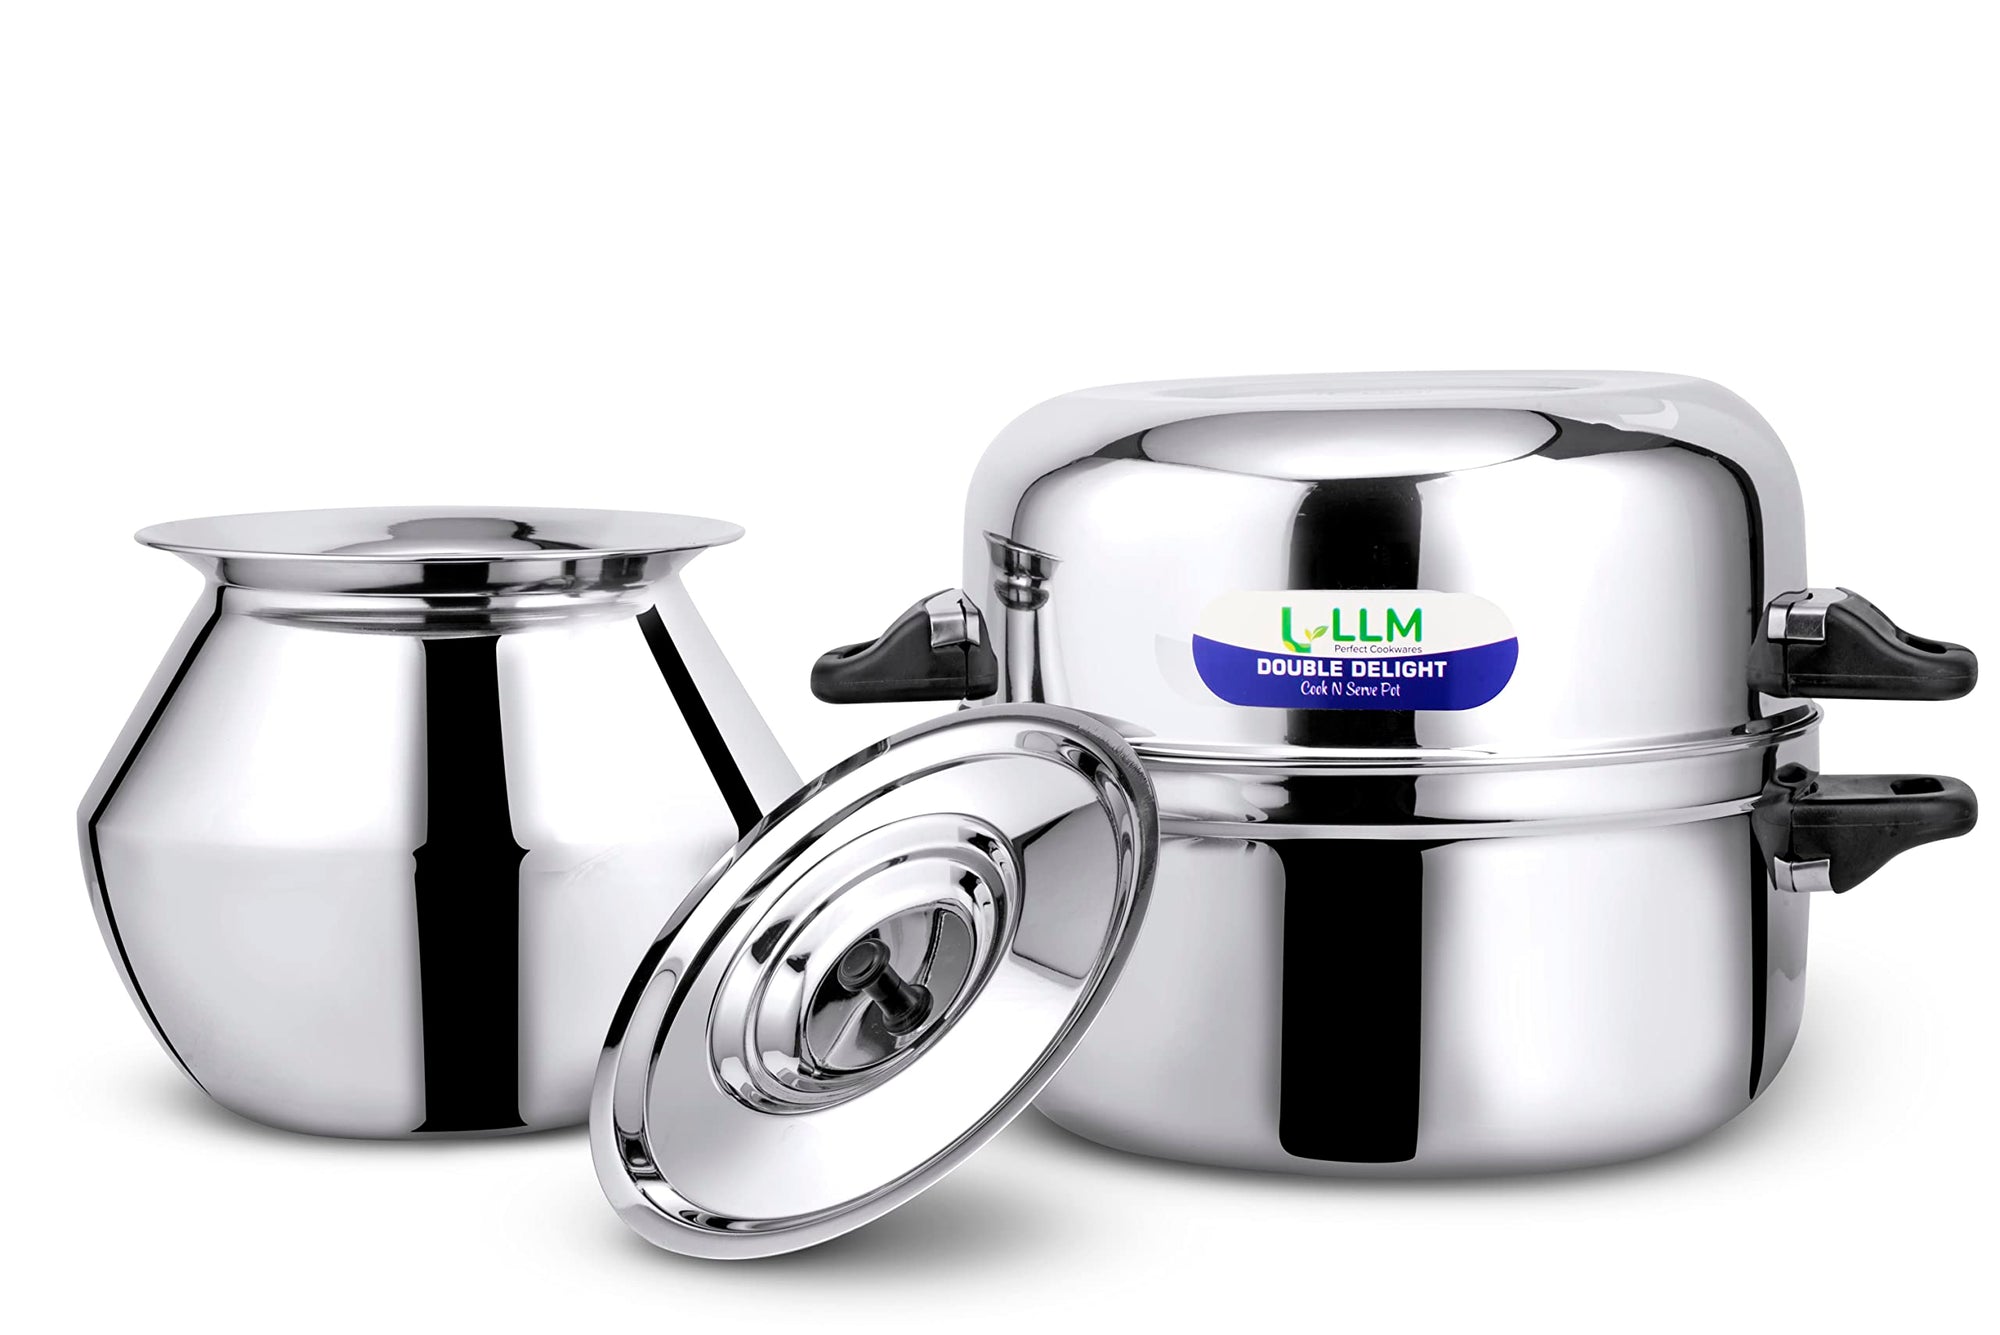 LLM Stainless Steel Double Delight Cook and Serve Pot Thermal Rice Cooker 1.0 Kg, Silver